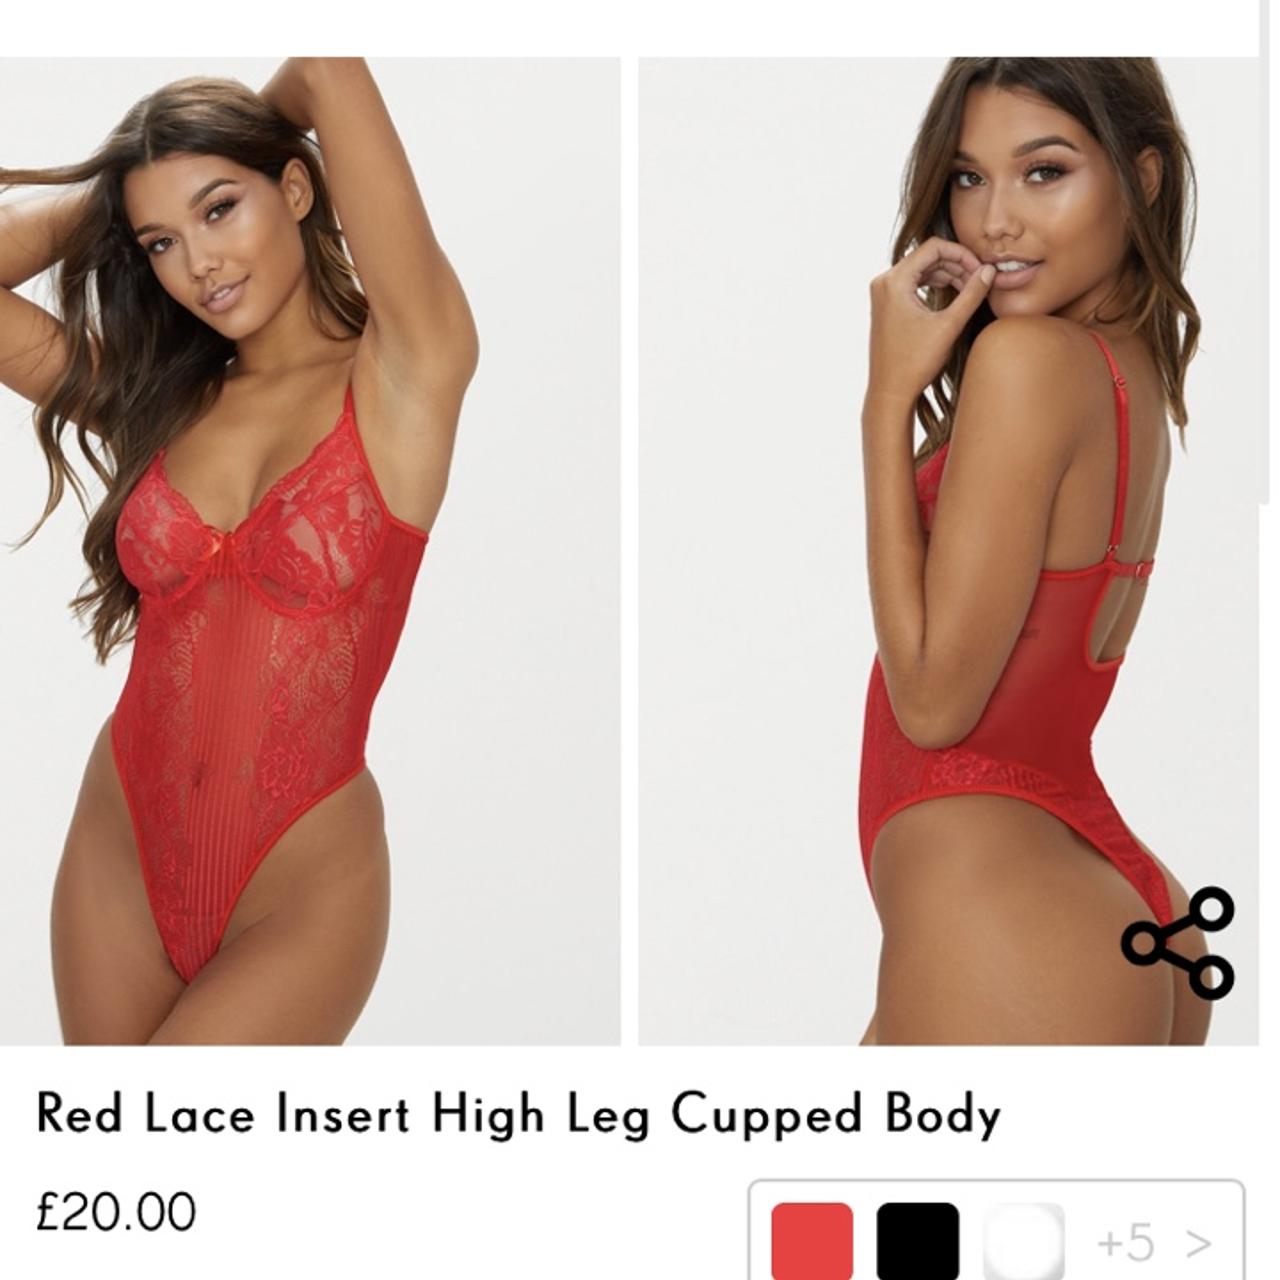 Red lace insert high leg cupped body. Originally